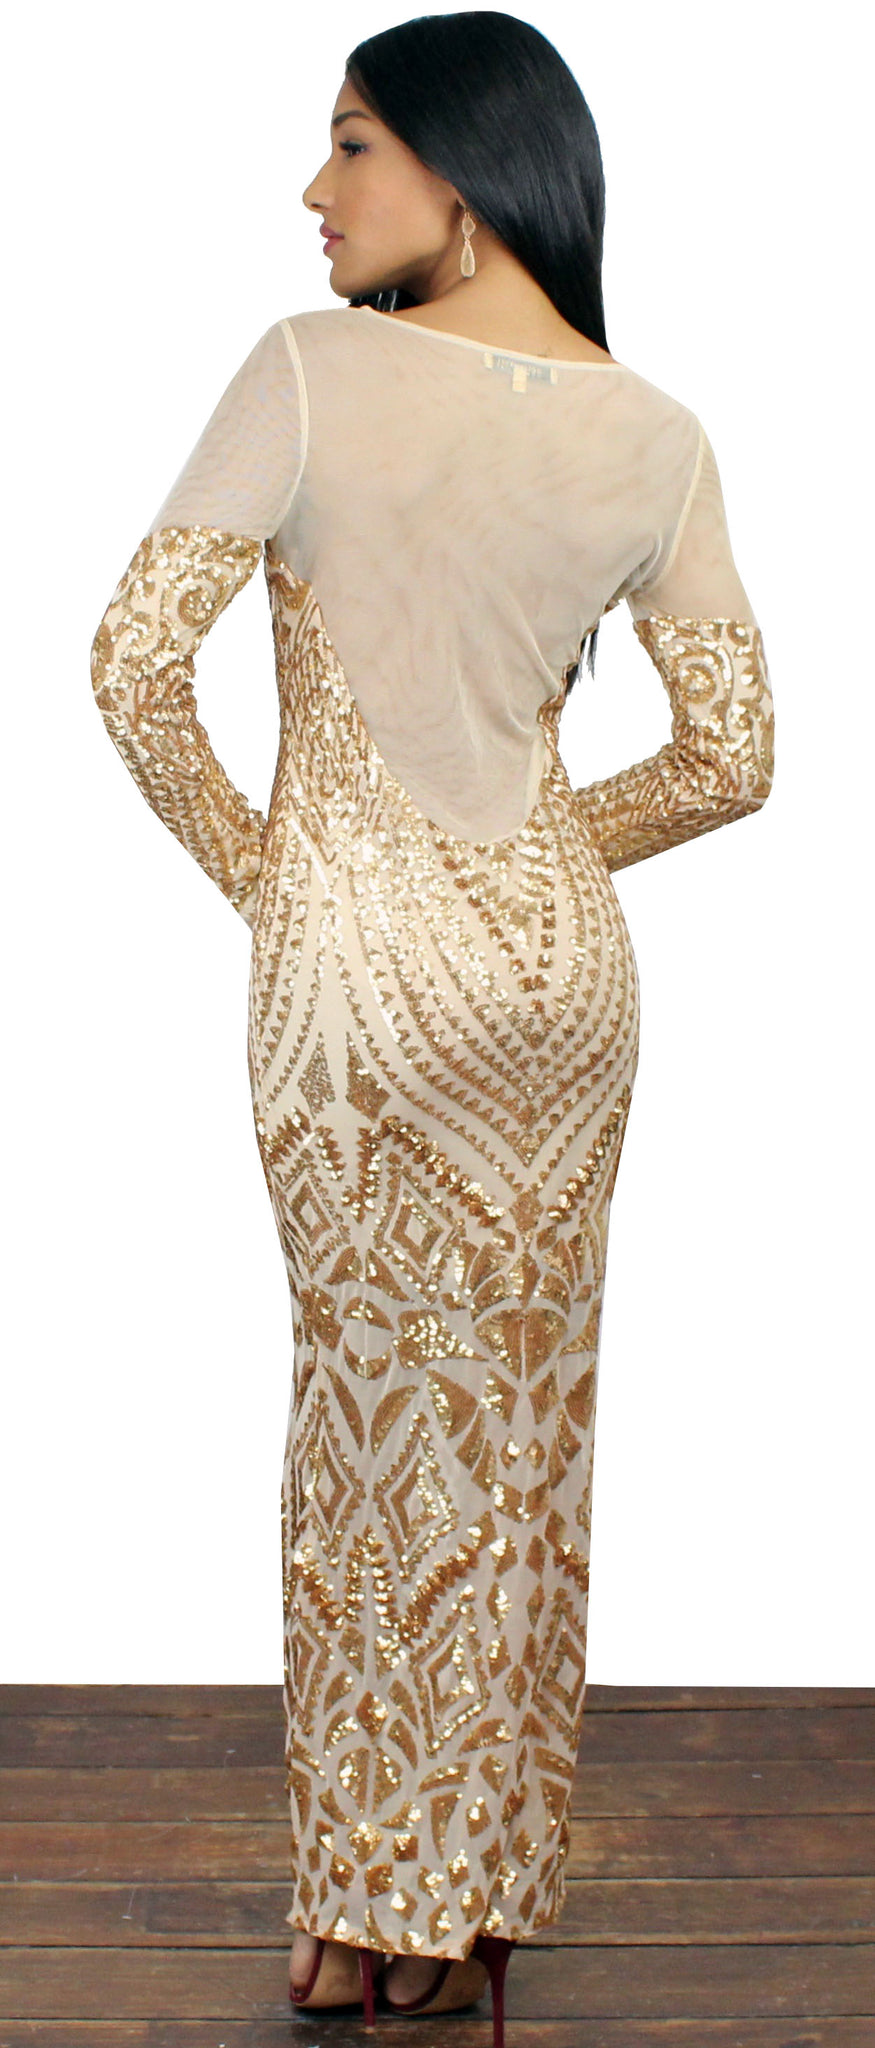 This is the Golden Dress Sequins Midi Dress